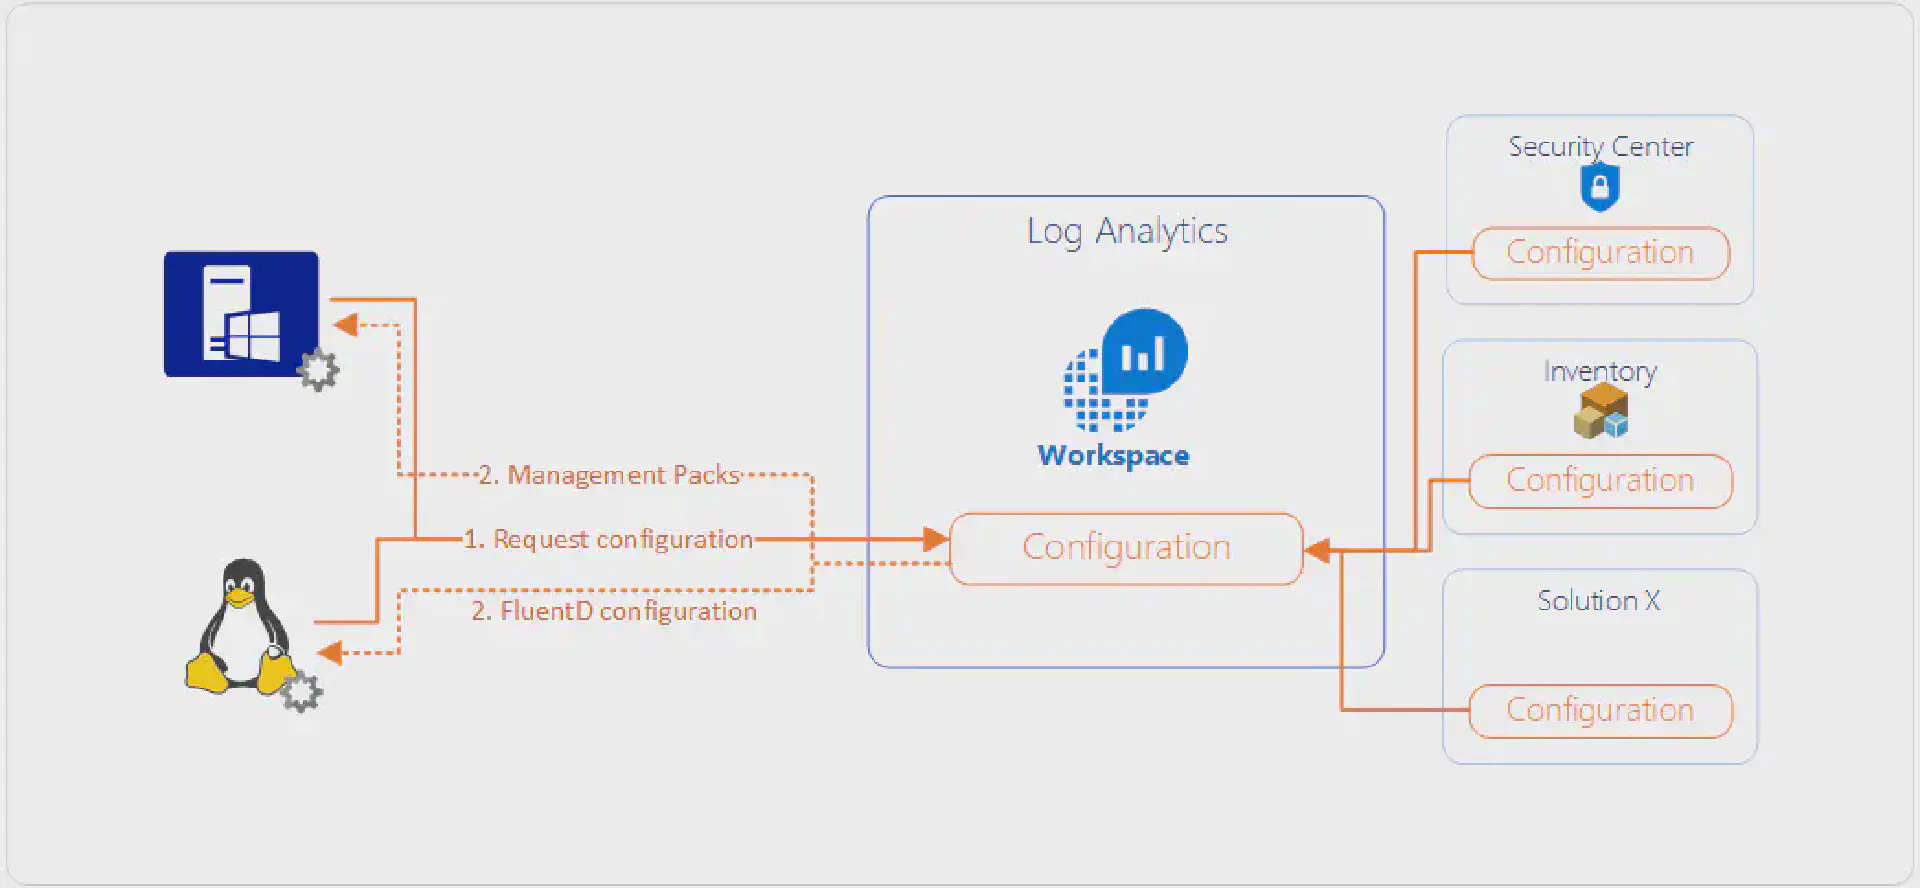 Agent instrumentation for Log Analytics based services (such as Azure Security Center)